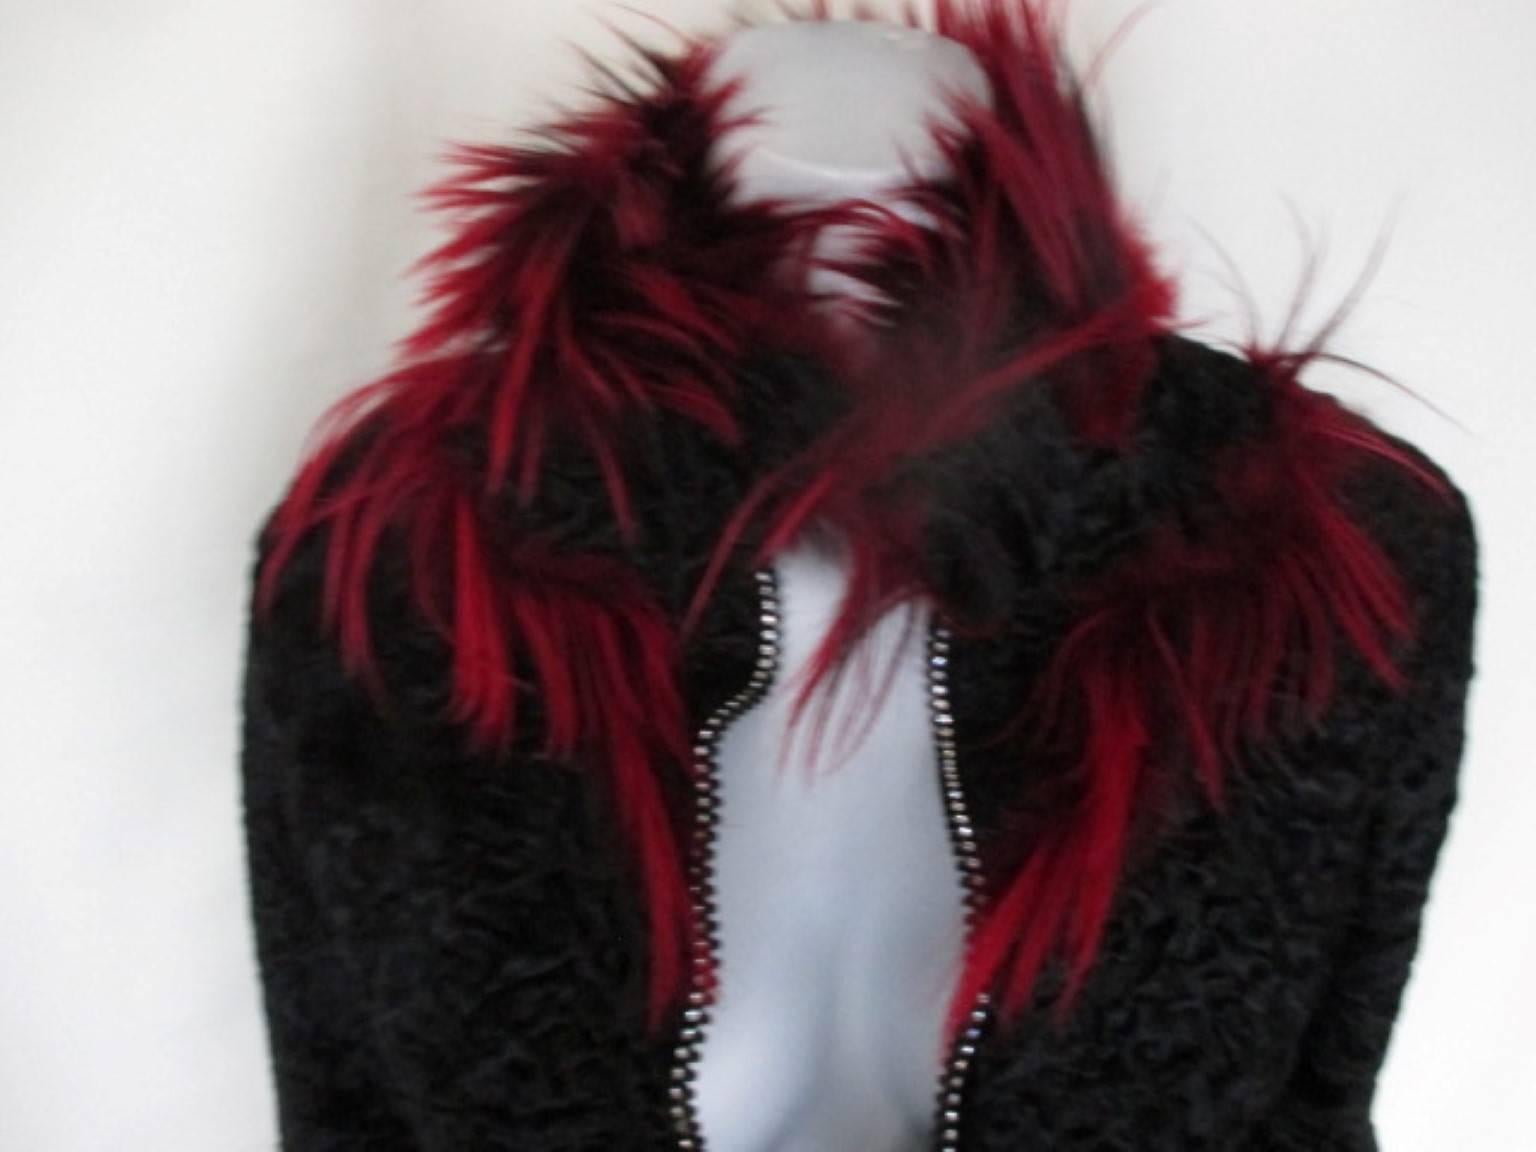 This vintage Italian design jacket is made of black persian lamb and trimmed with dyed red fur.

We offer more vintage fur items, view ur frontstore

Details:
Closes with a zipper which is trimmed with rhinestones.
No pockets. fully lined.
Appears